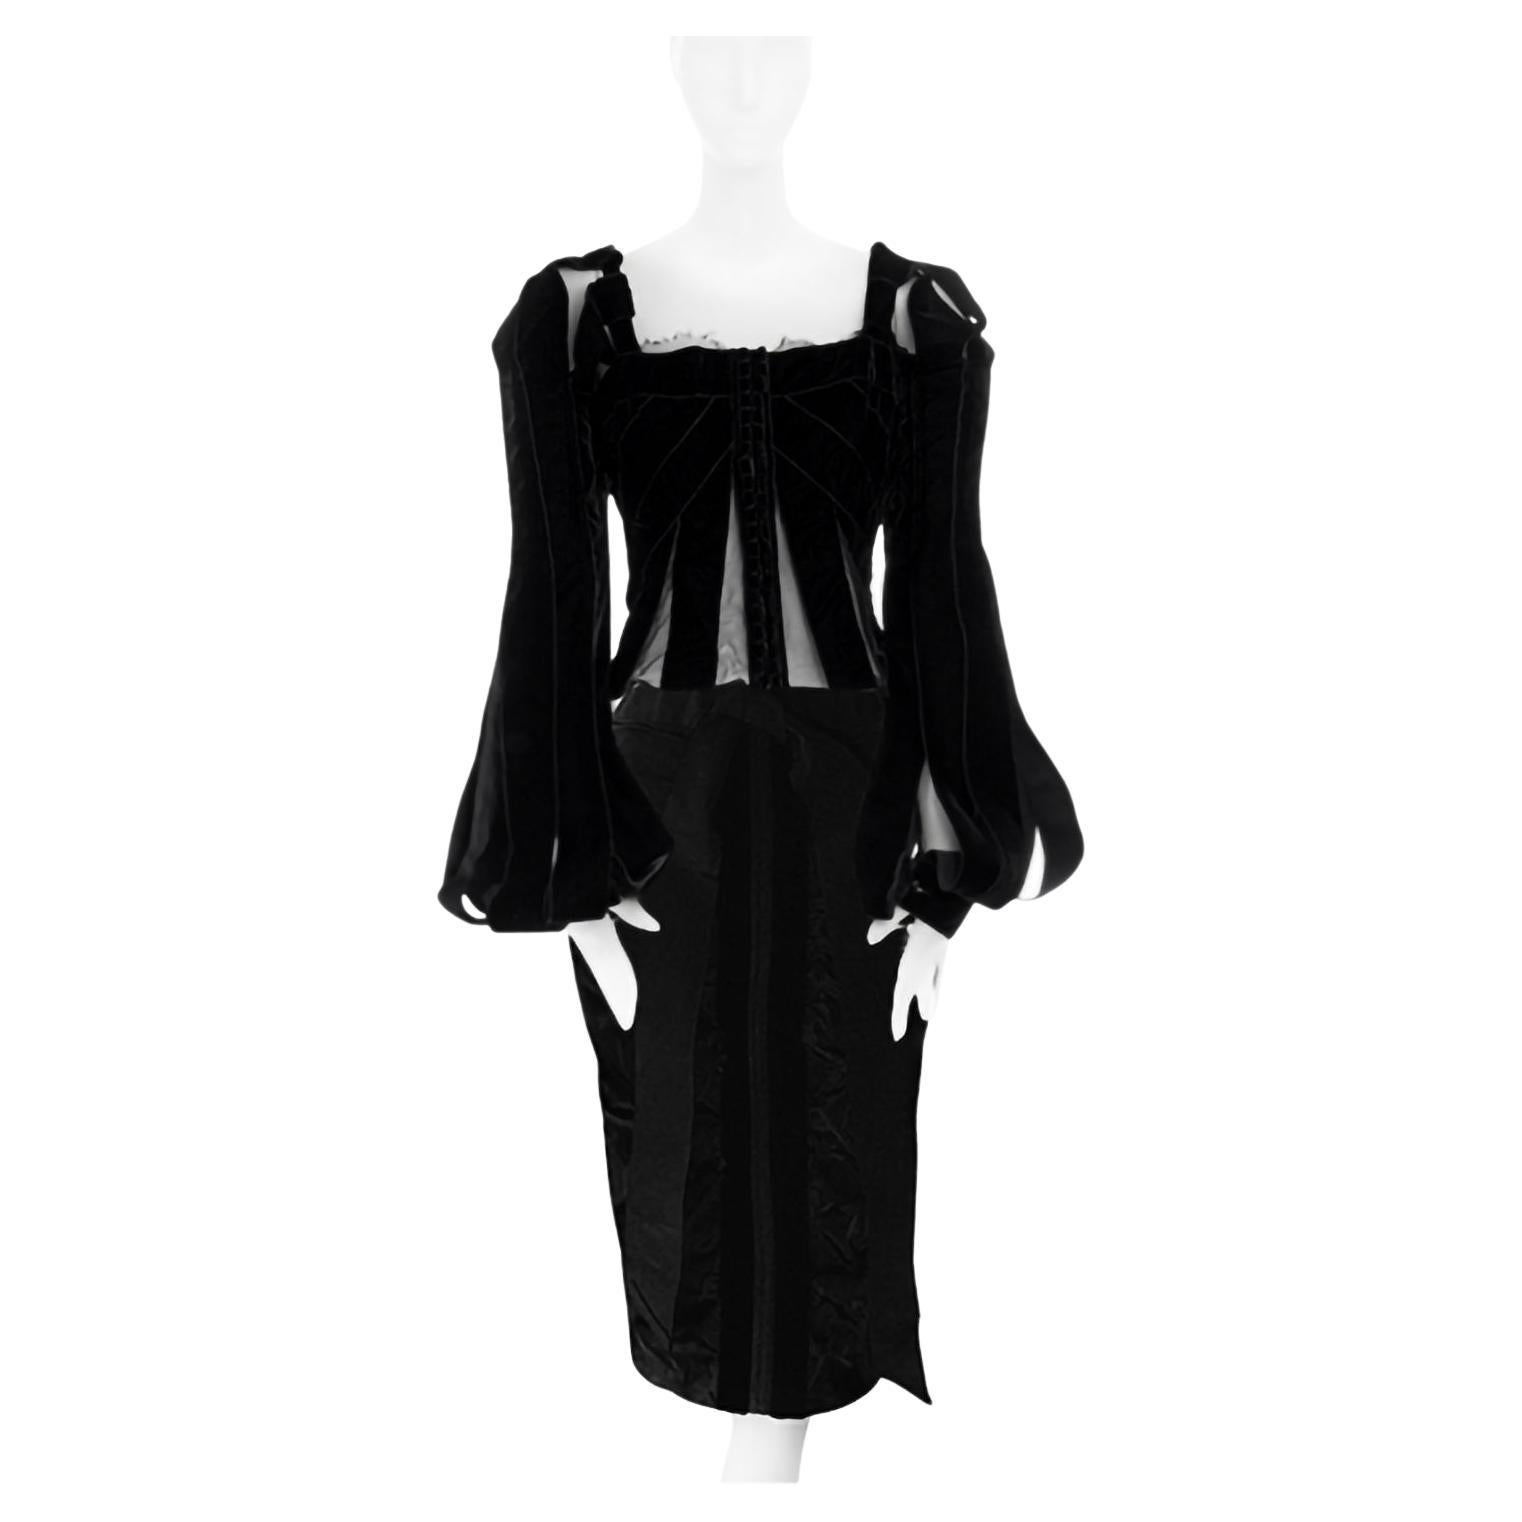 Iconic Tom Ford for Yves Saint Laurent FW2002 Runway Silk Black Corset and Skirt For Sale